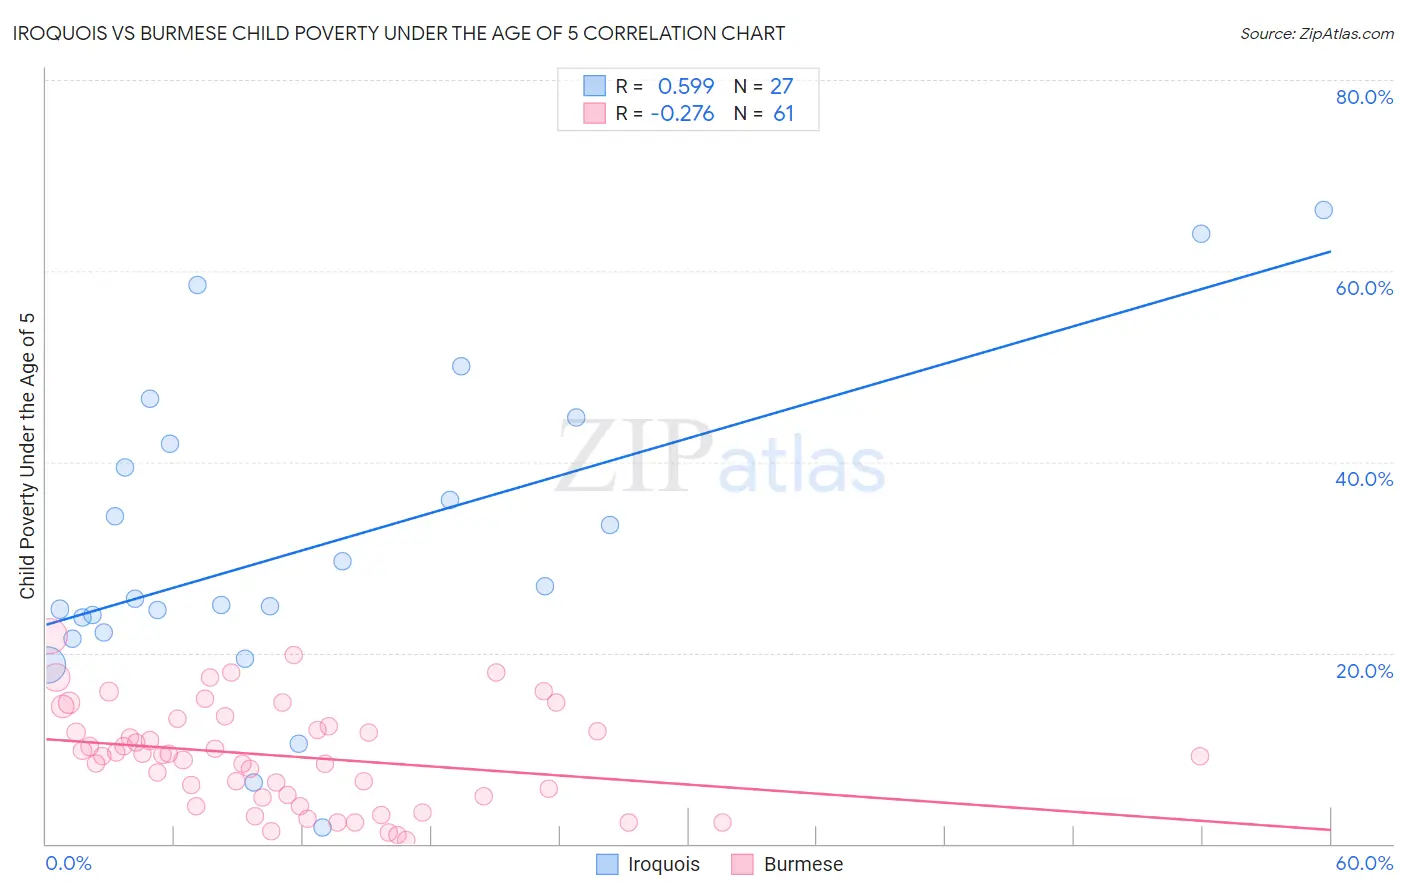 Iroquois vs Burmese Child Poverty Under the Age of 5